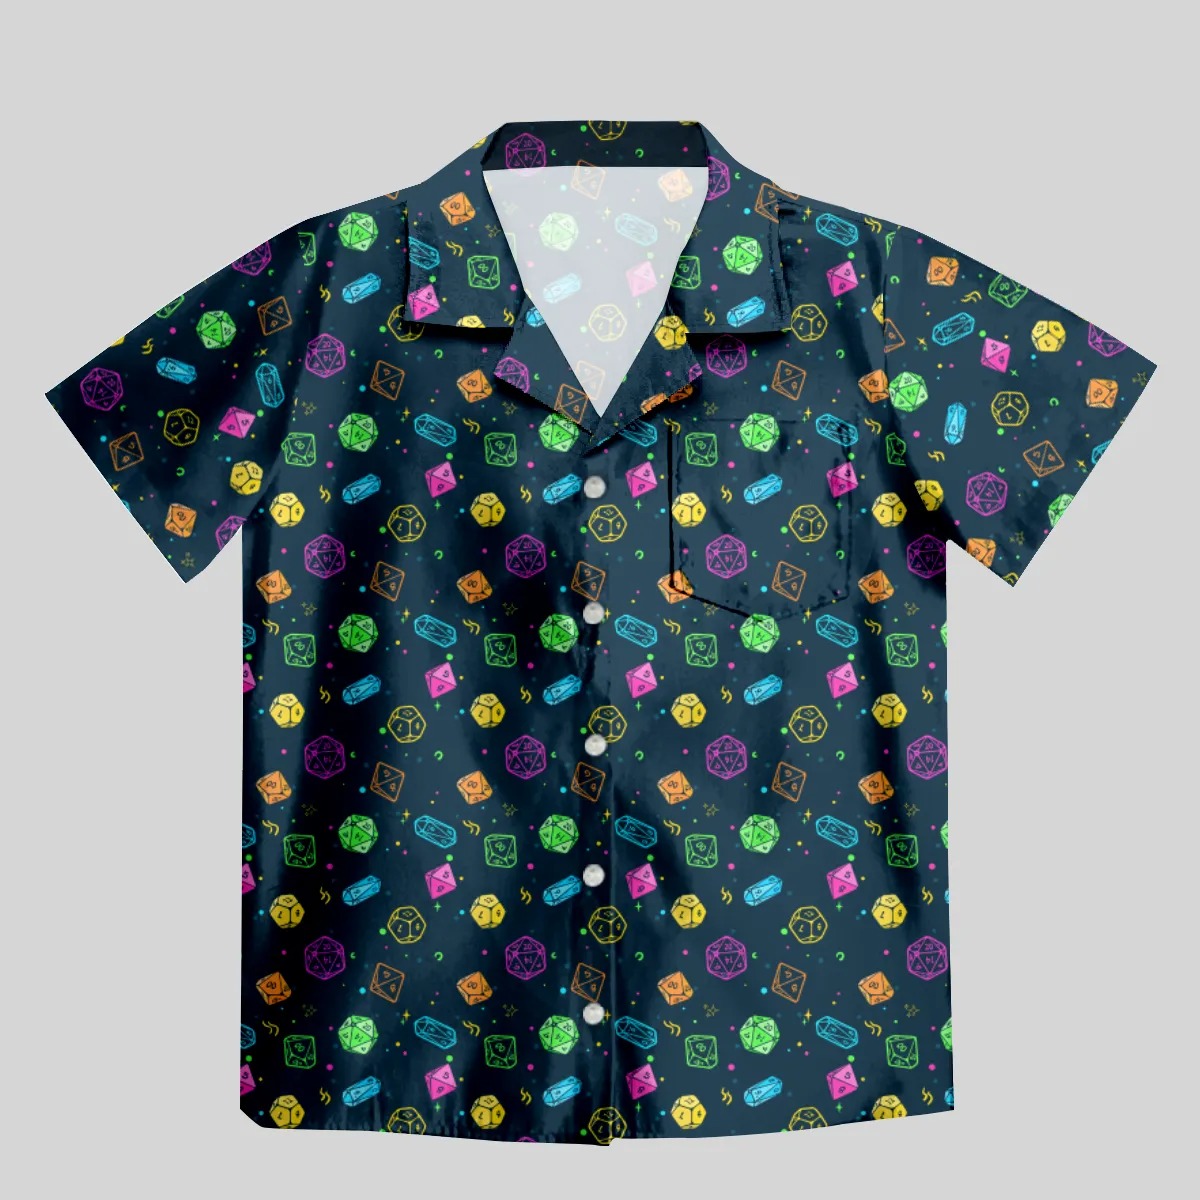 Geeksoutfit Colorful DND Dice RPG Button Up Pocket Shirt